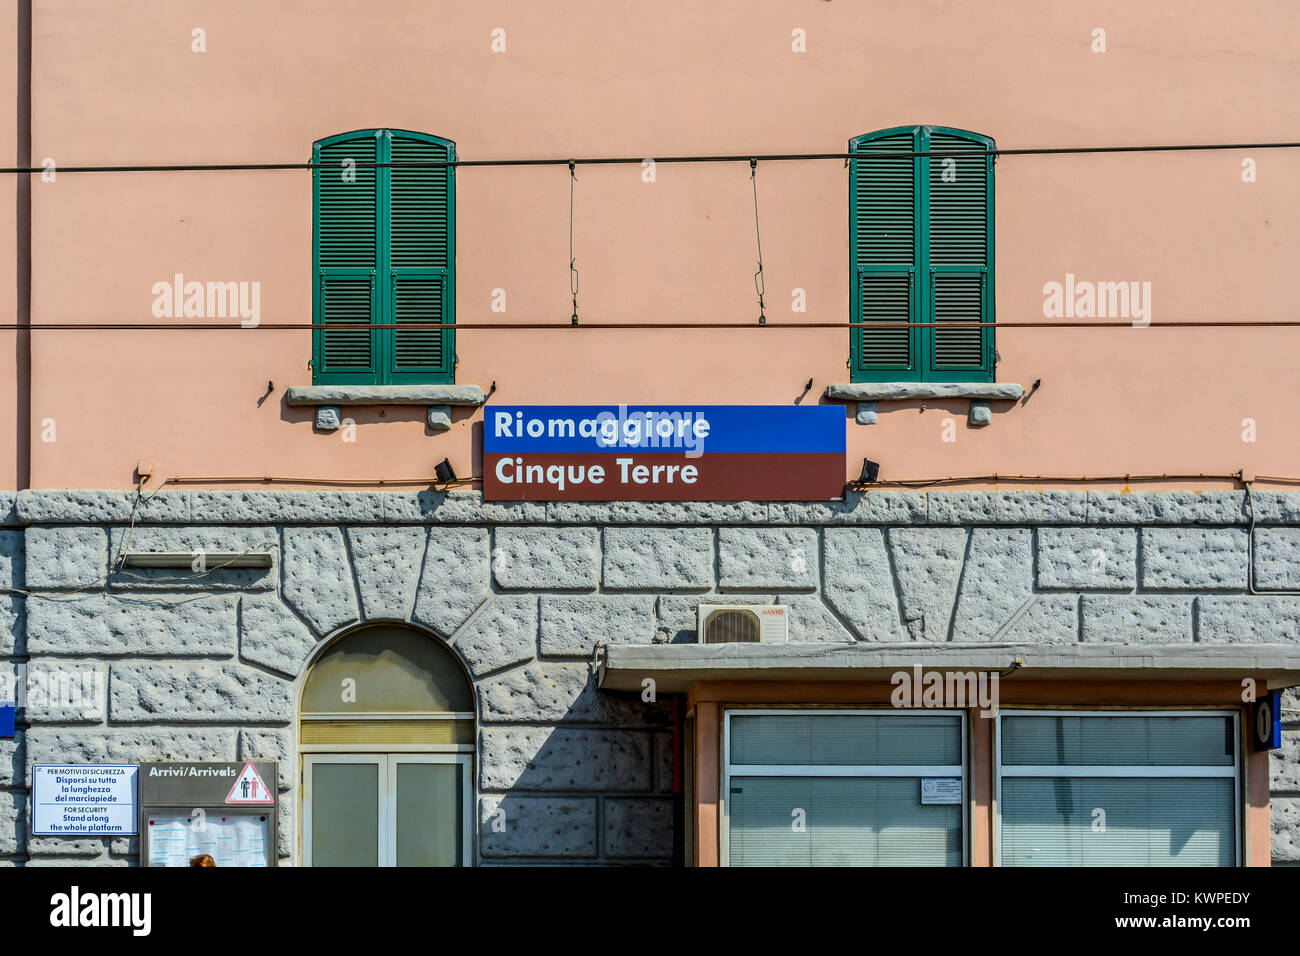 The railway train station and village sign for Riomaggiore Italy on the coast of the Cinque Terre Stock Photo